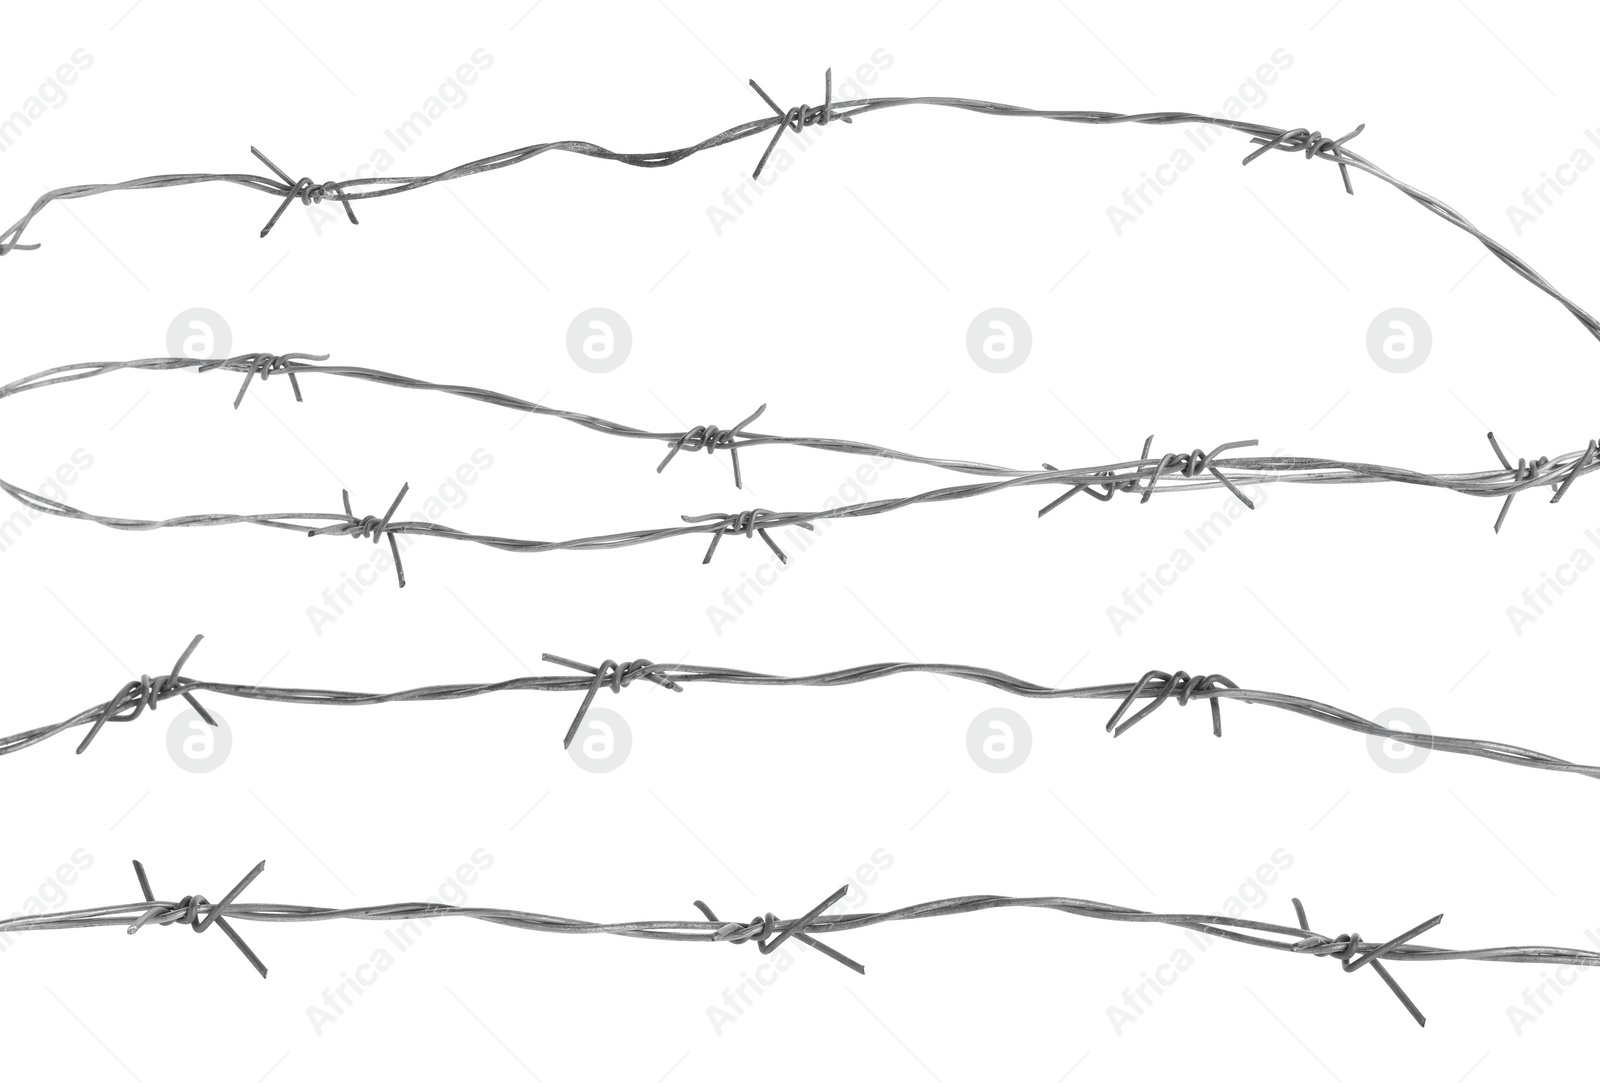 Image of Double twist barbed wire isolated on white, set